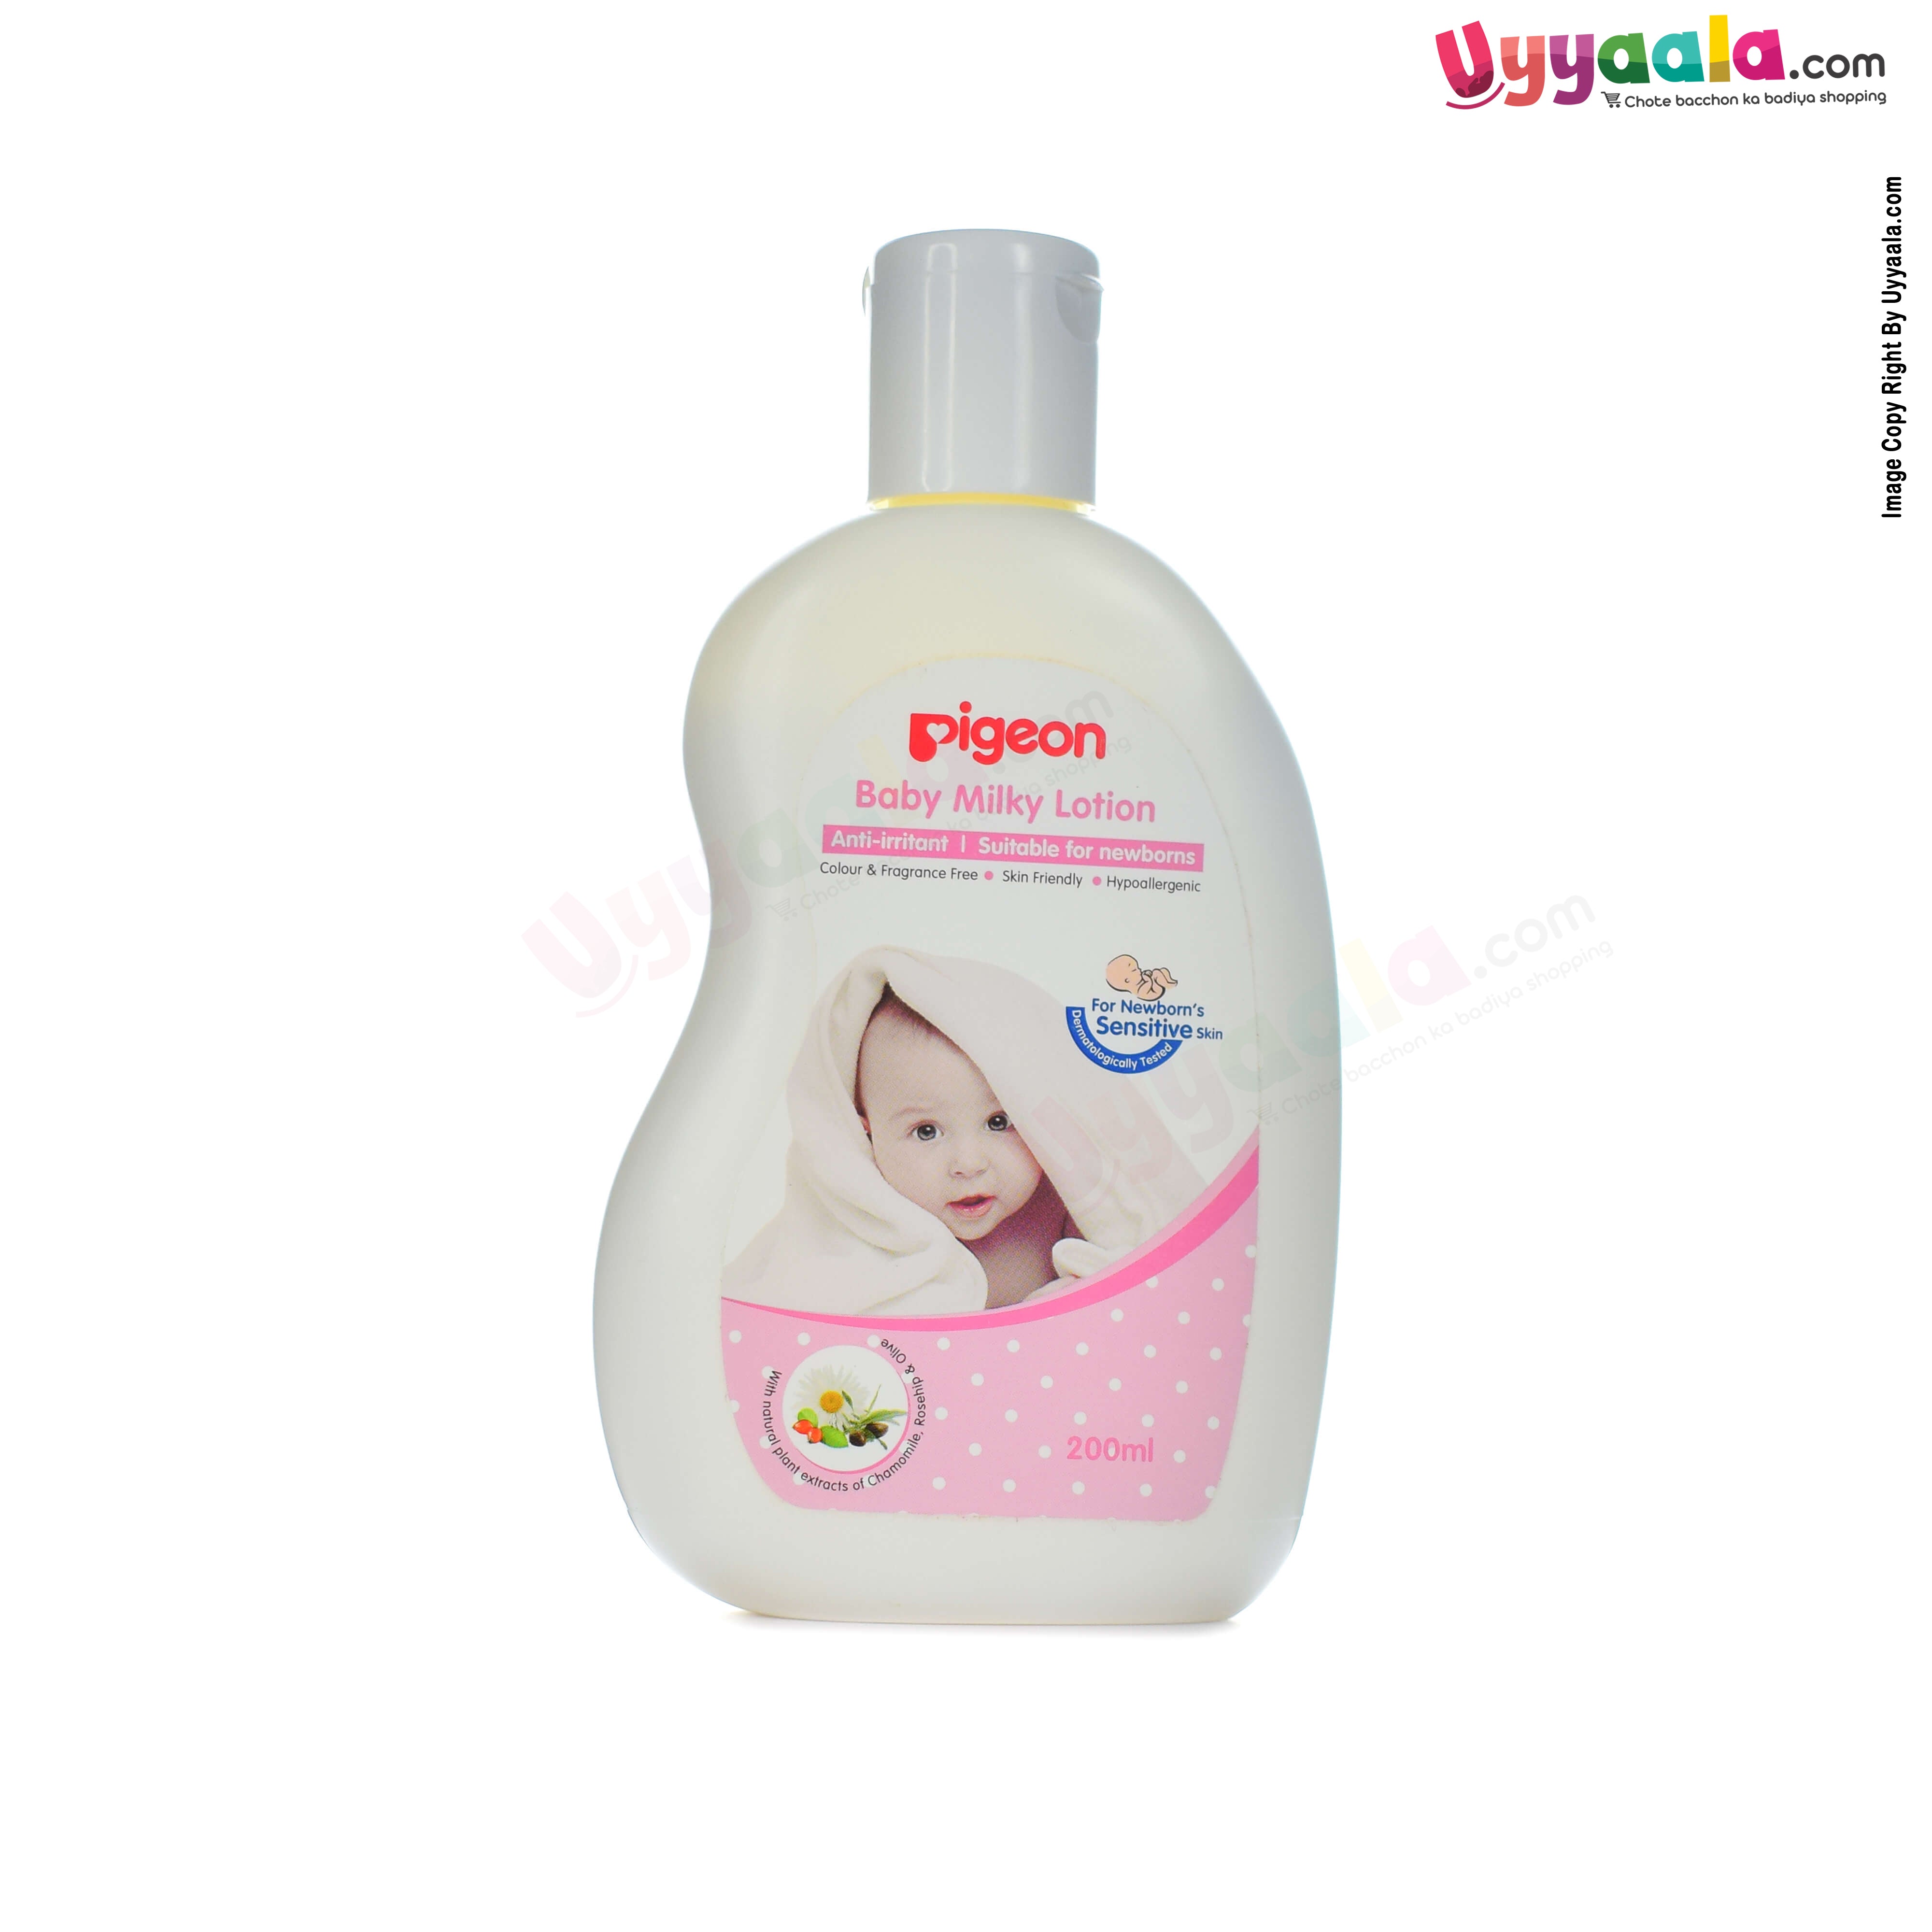 Pigeon Baby Milky Lotion Fragrance Free 200ml